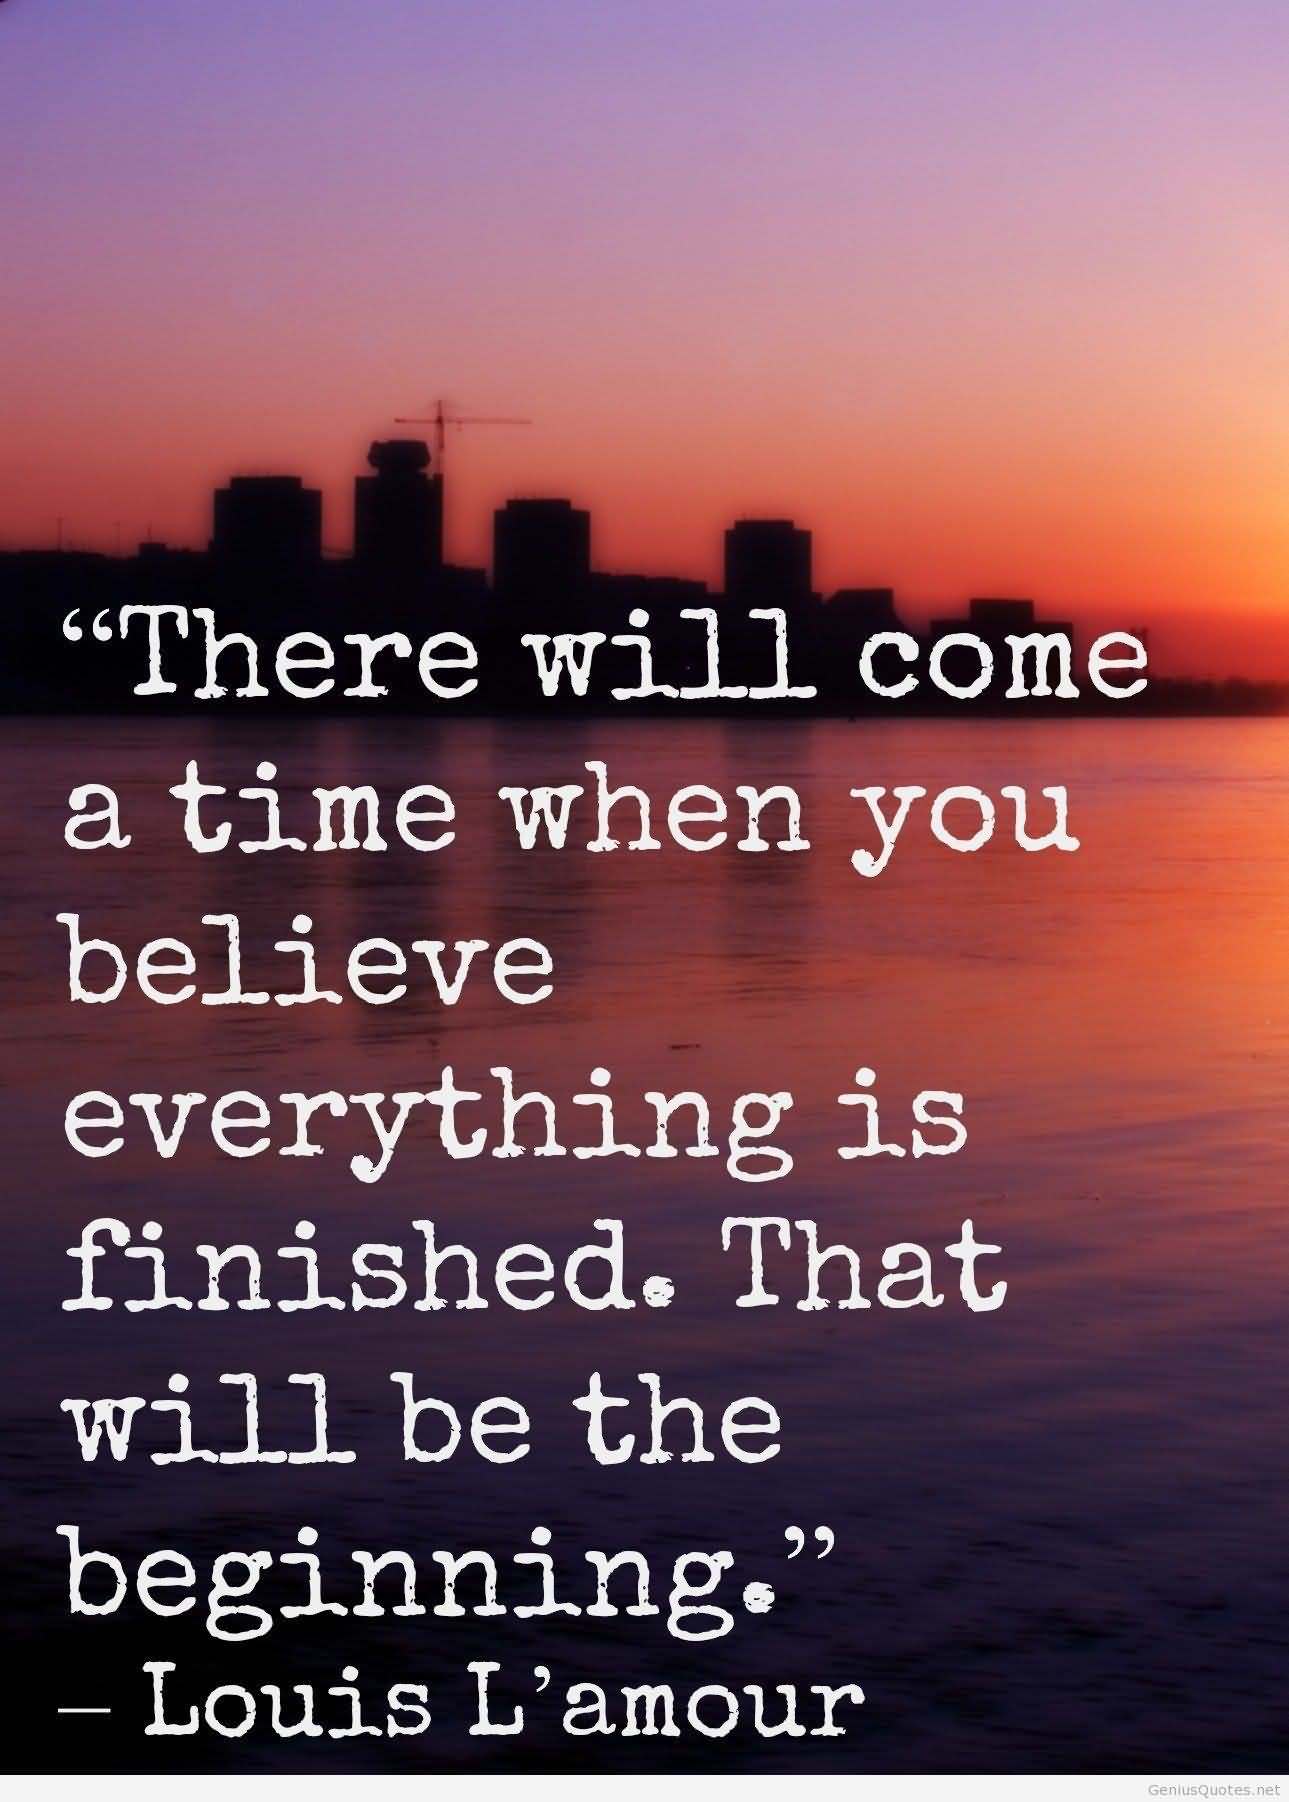 There will come a time when you believe everything is finished; that will be the beginning. Louis L'Amour